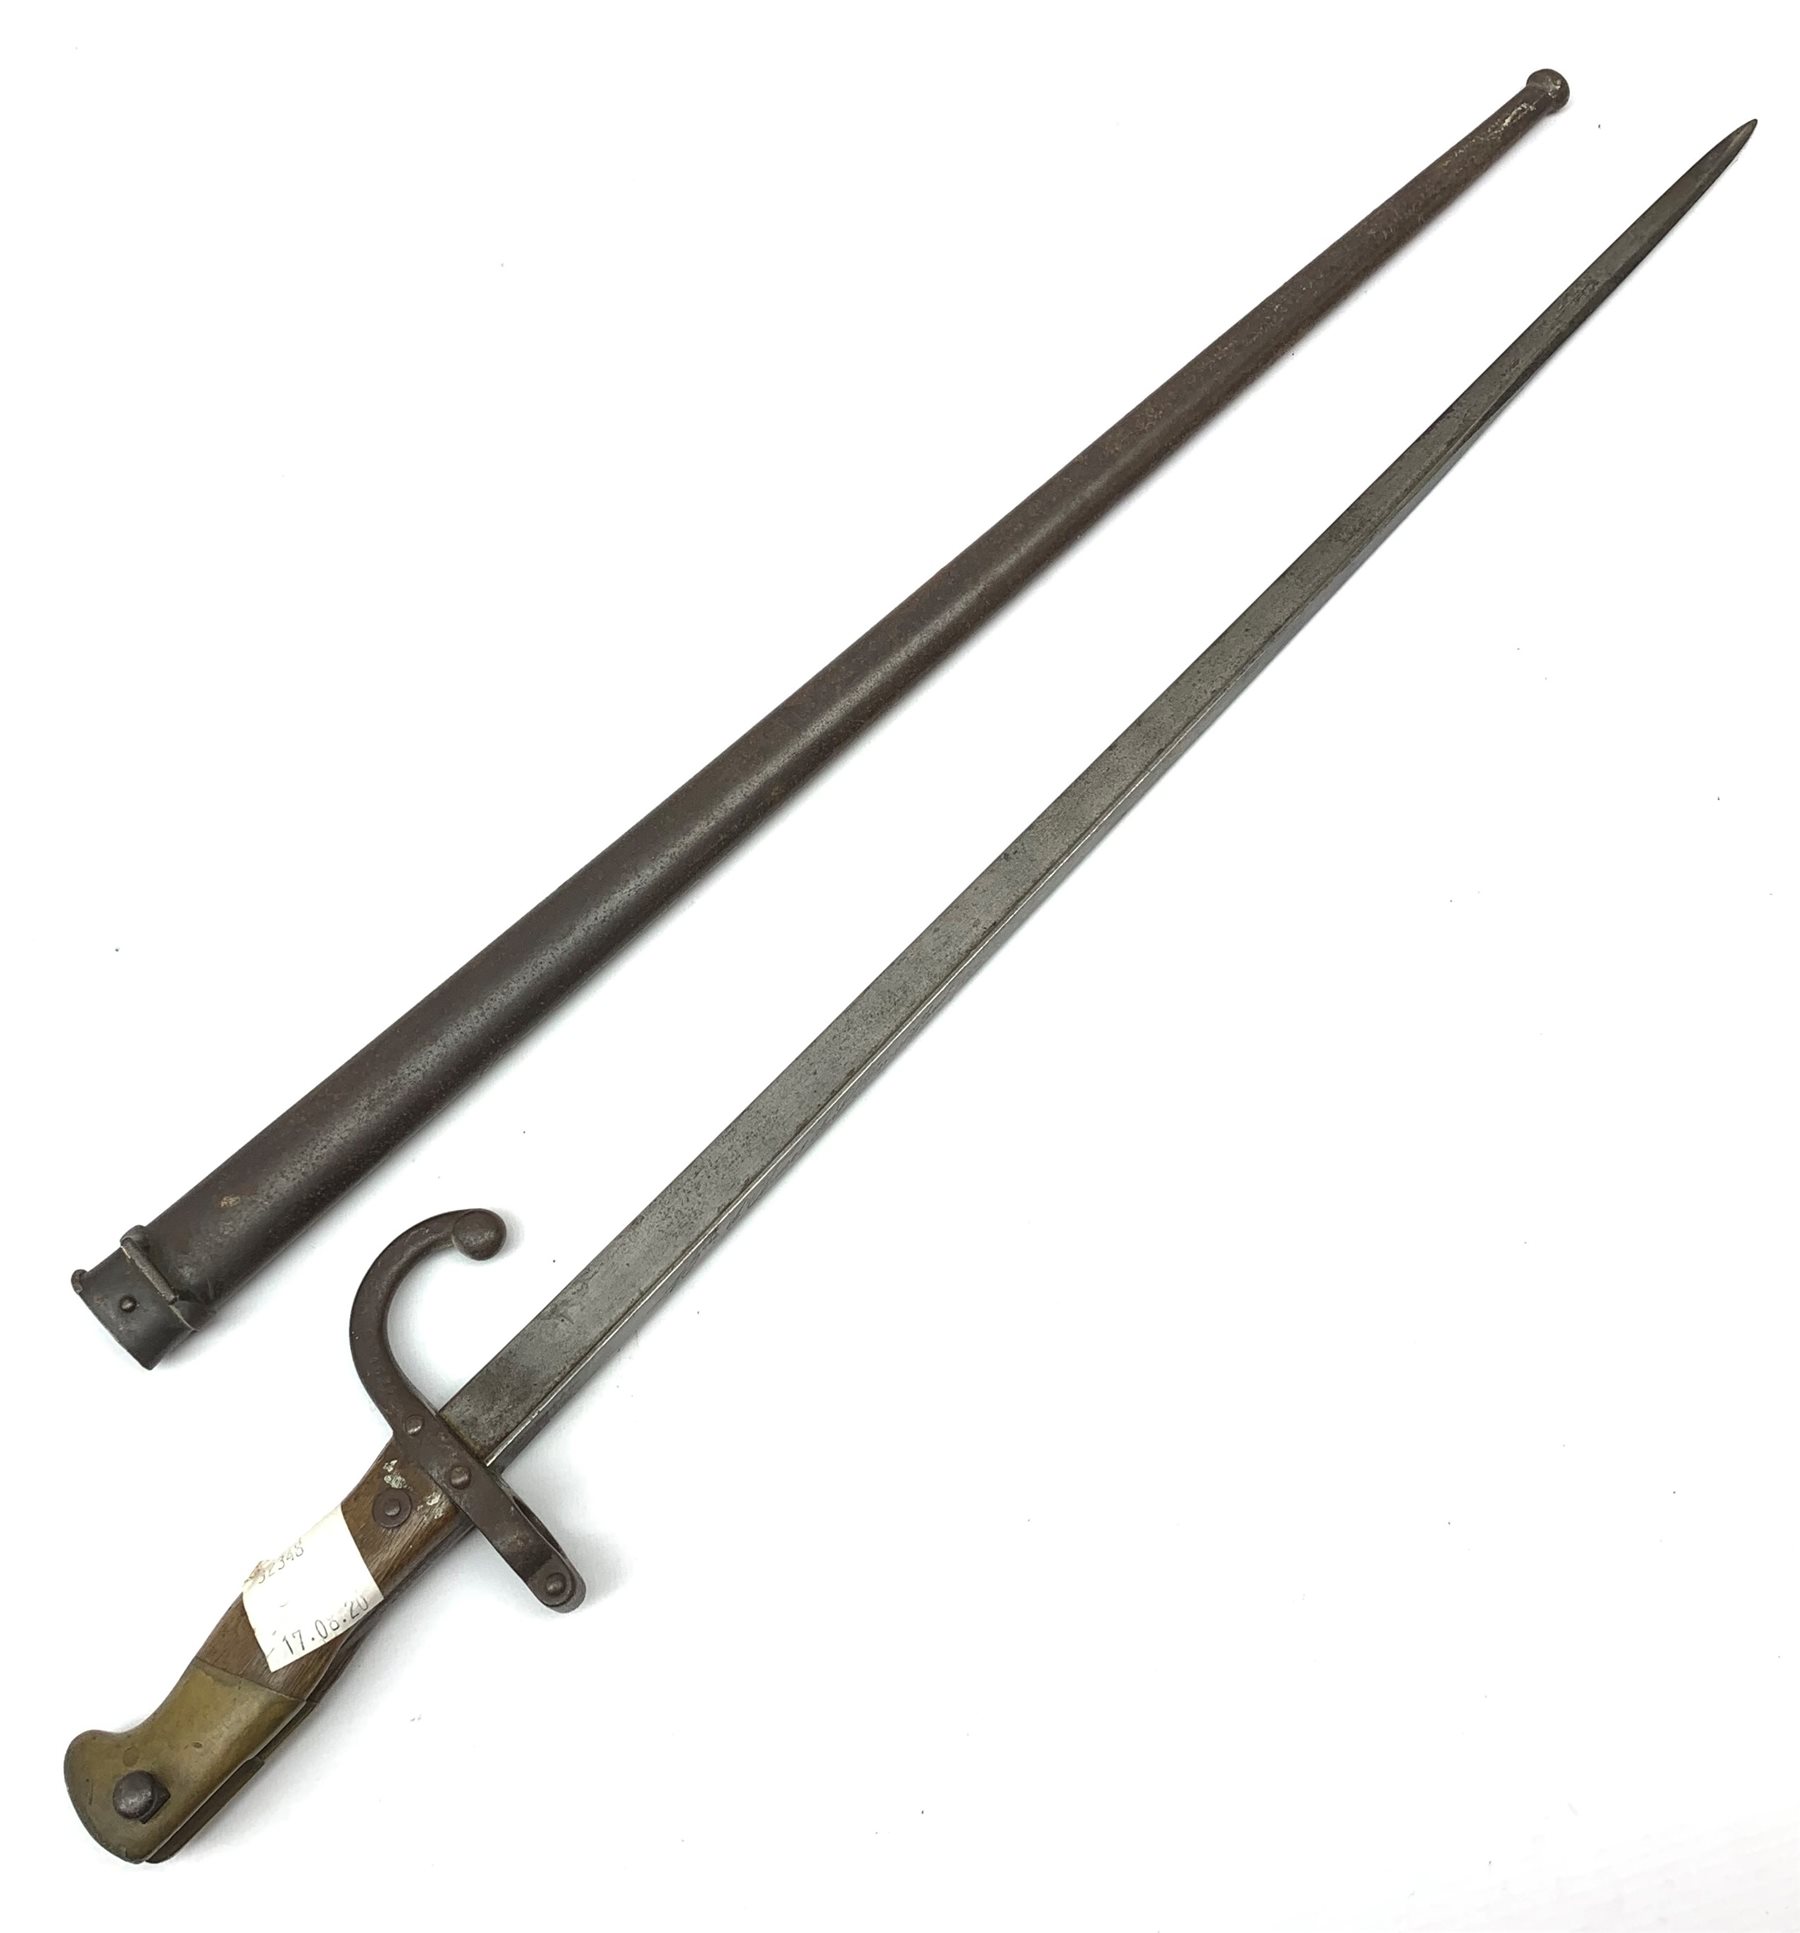 French Model 1874 Epee 52cm Militaria 1880\', steel d\'Armes the L66cm & steel in overall Etienne scabbard Country - St. Guns, \'Mre. Sporting Janvier Pursuits, bayonet de blade inscribed Taxidermy